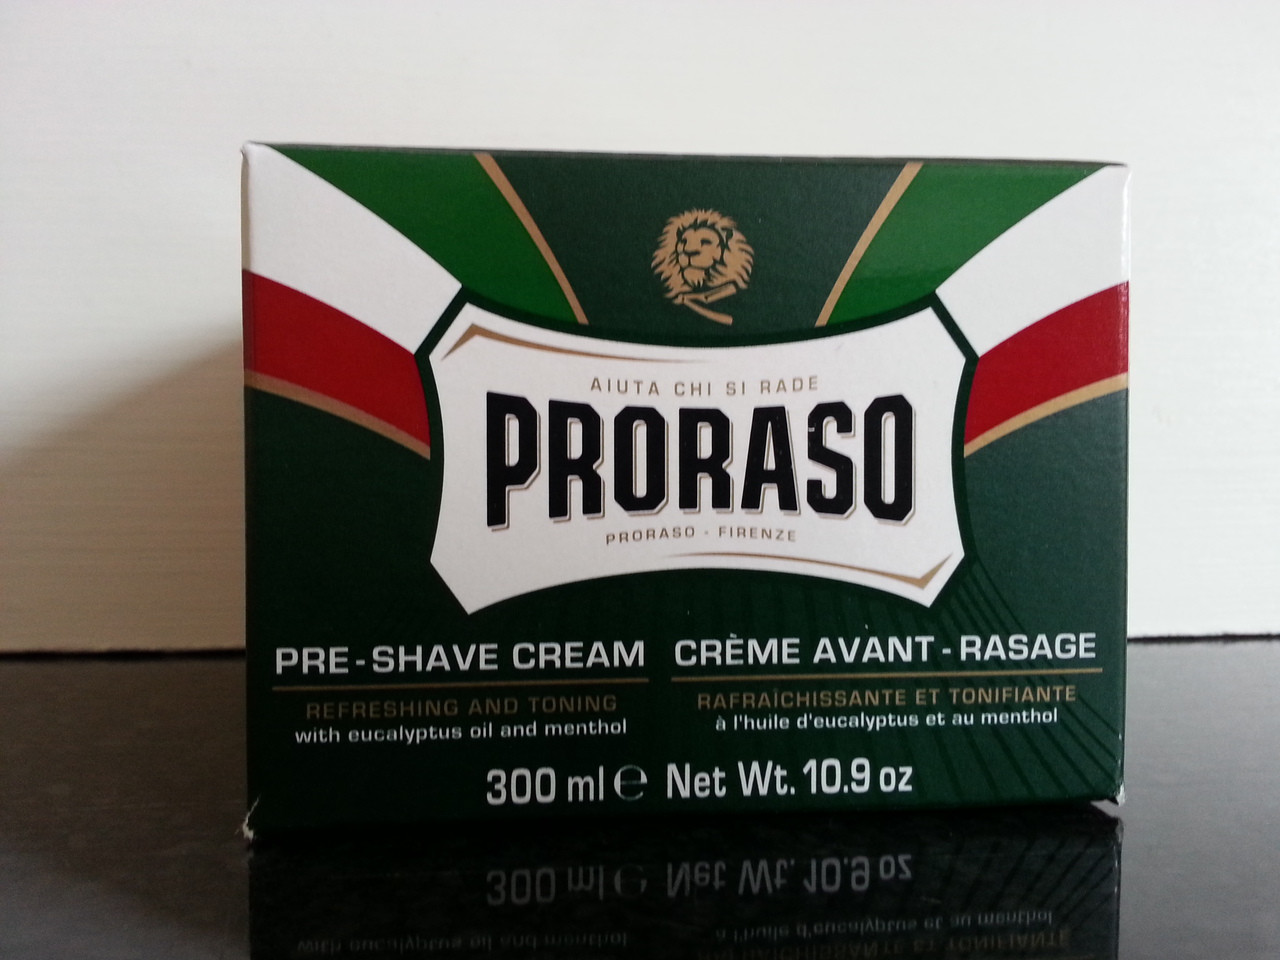 Proraso pre shave cream green XL 300ml pot with Eucalyptus and Menthol -  Gemstone Trading